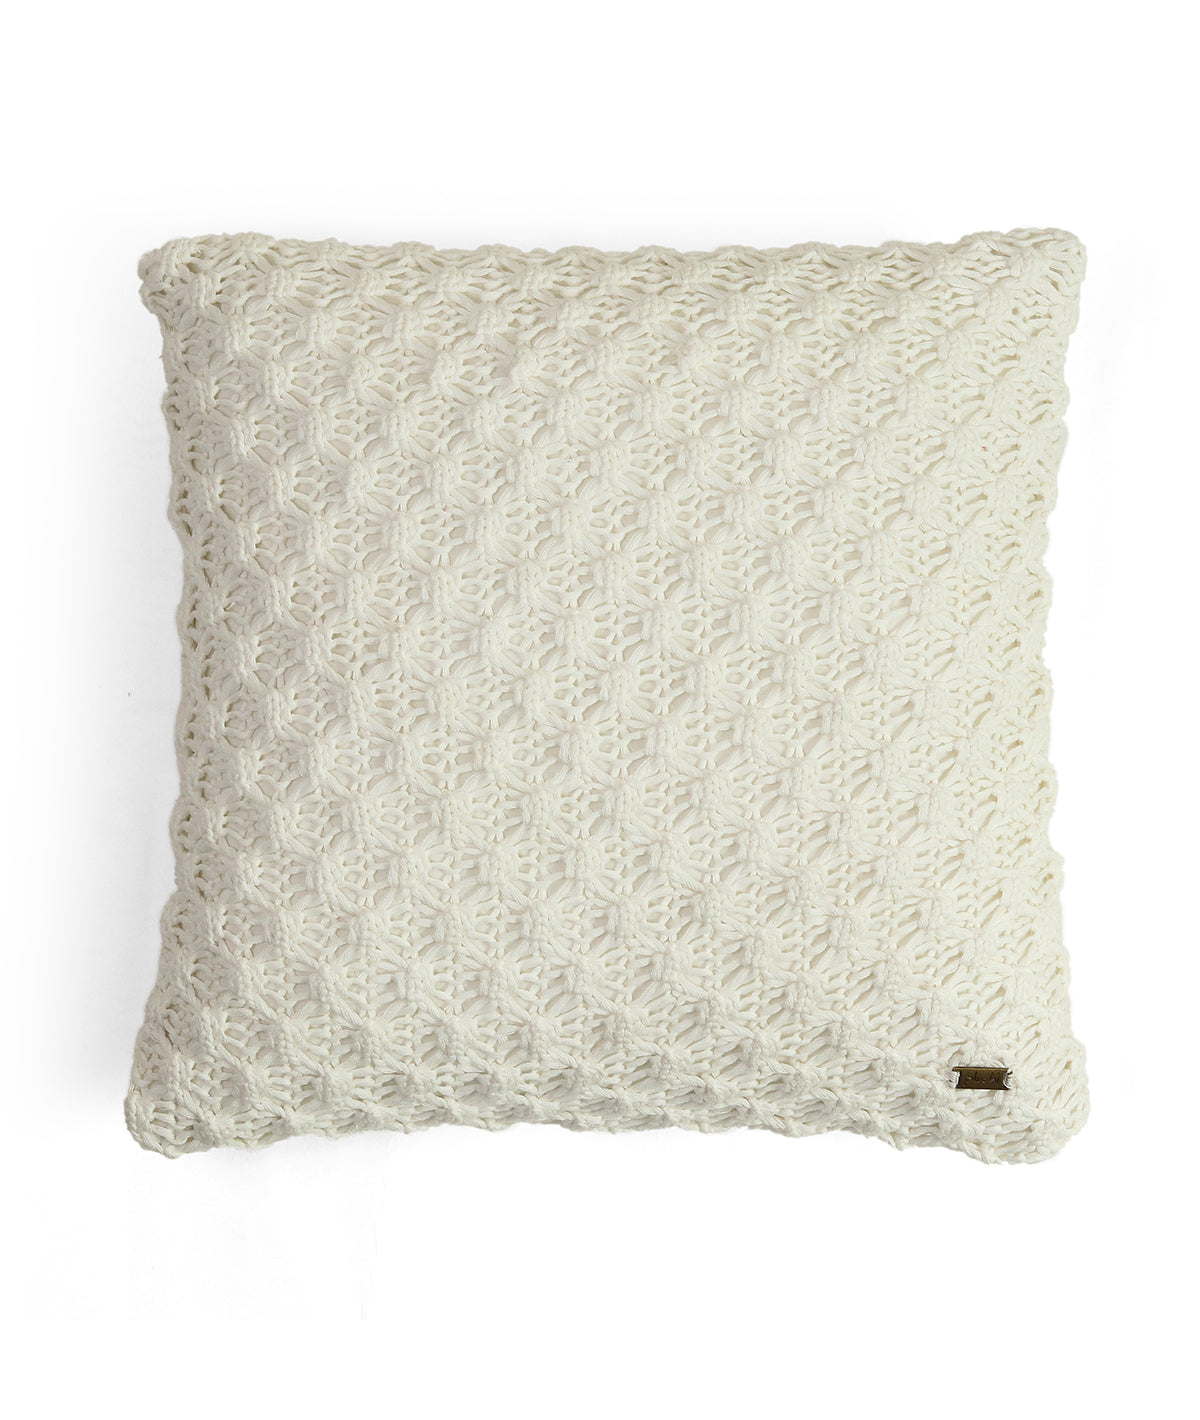 Popcorn Ivory Cotton Knitted Decorative 16 X 16 Inches Cushion Cover